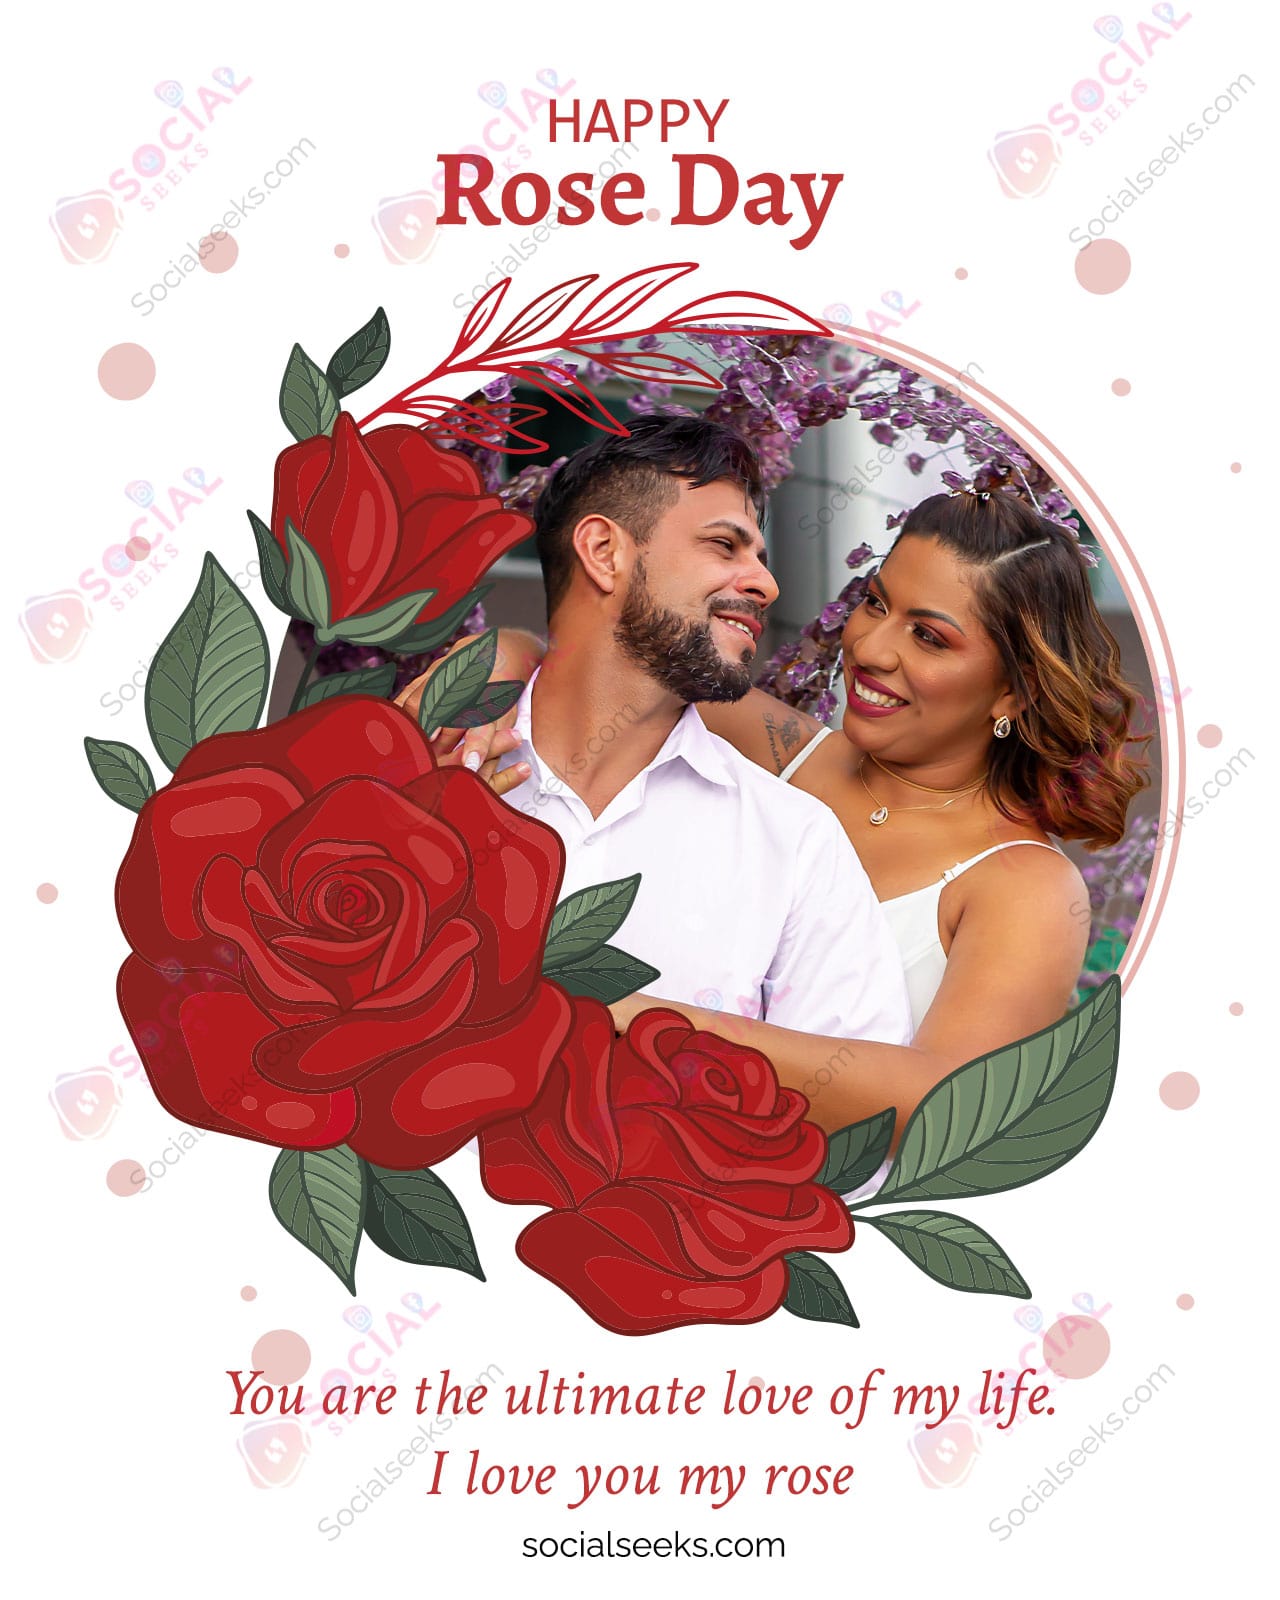 Happy Rose Day Photo Frames For Valentine Weeks Greeting Cards